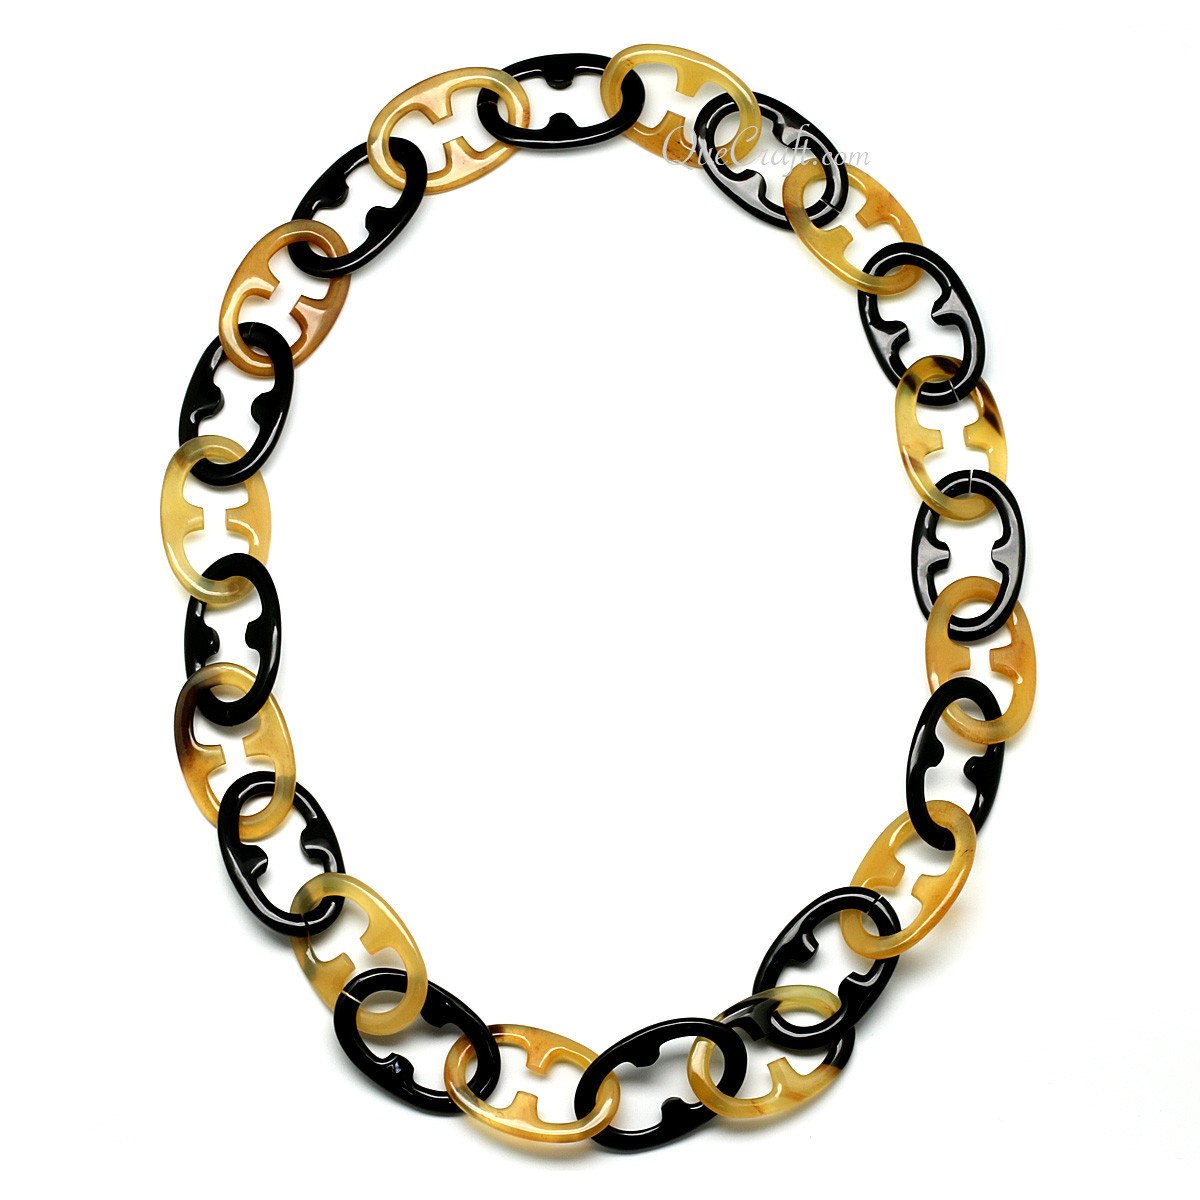 Horn Chain Necklace #11072 - HORN JEWELRY